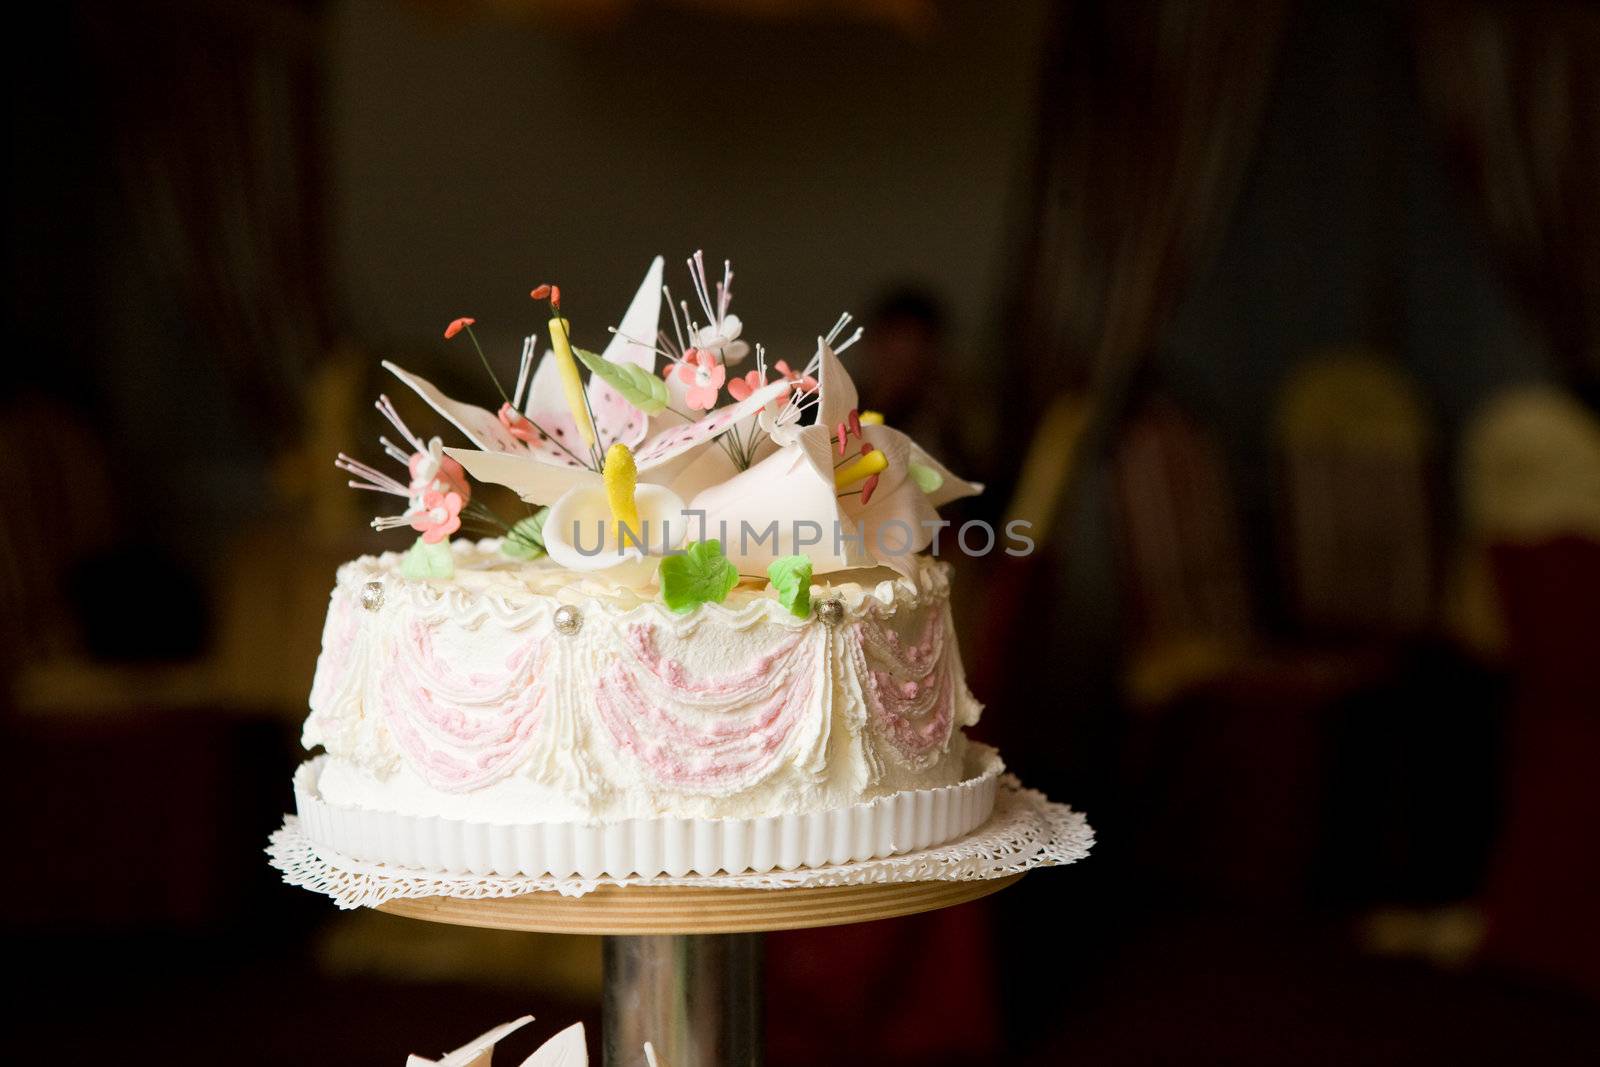 top of the cake by vsurkov